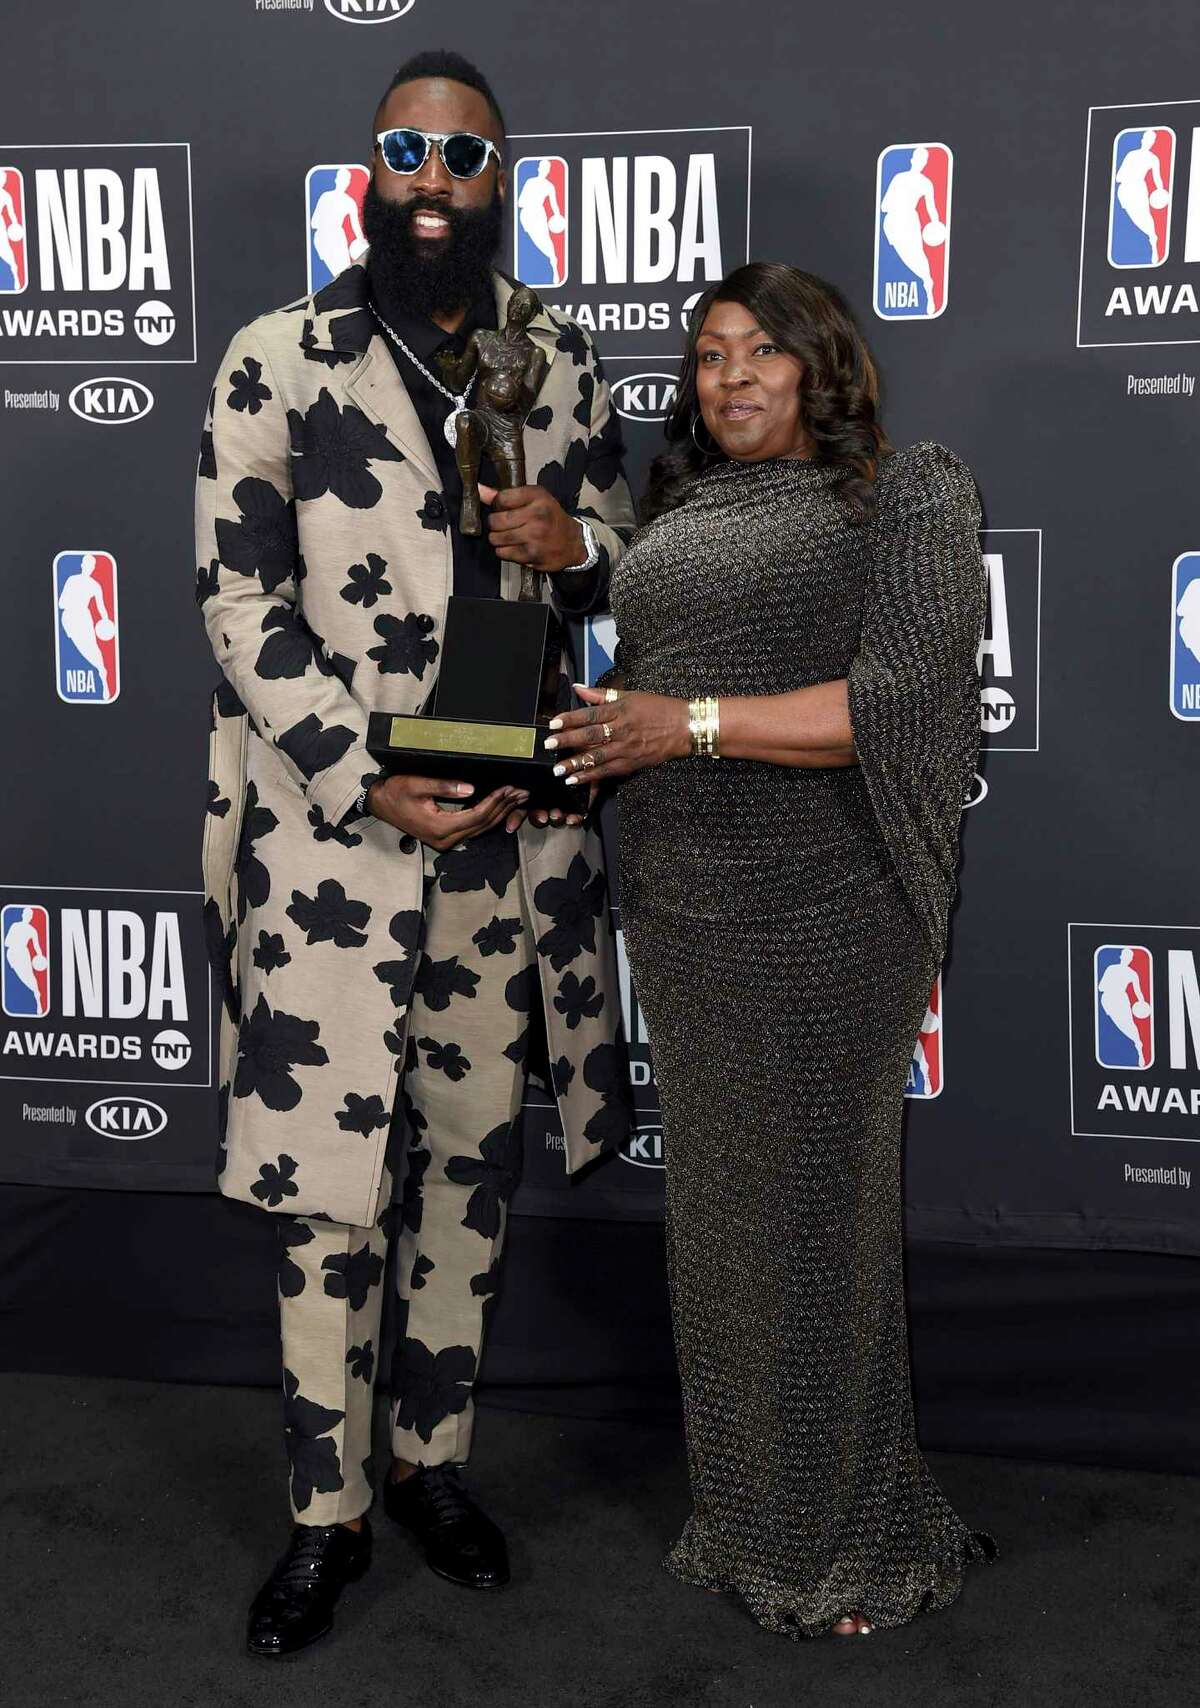 James Harden's Outfit at the NBA Awards Was as MVP-Worthy as